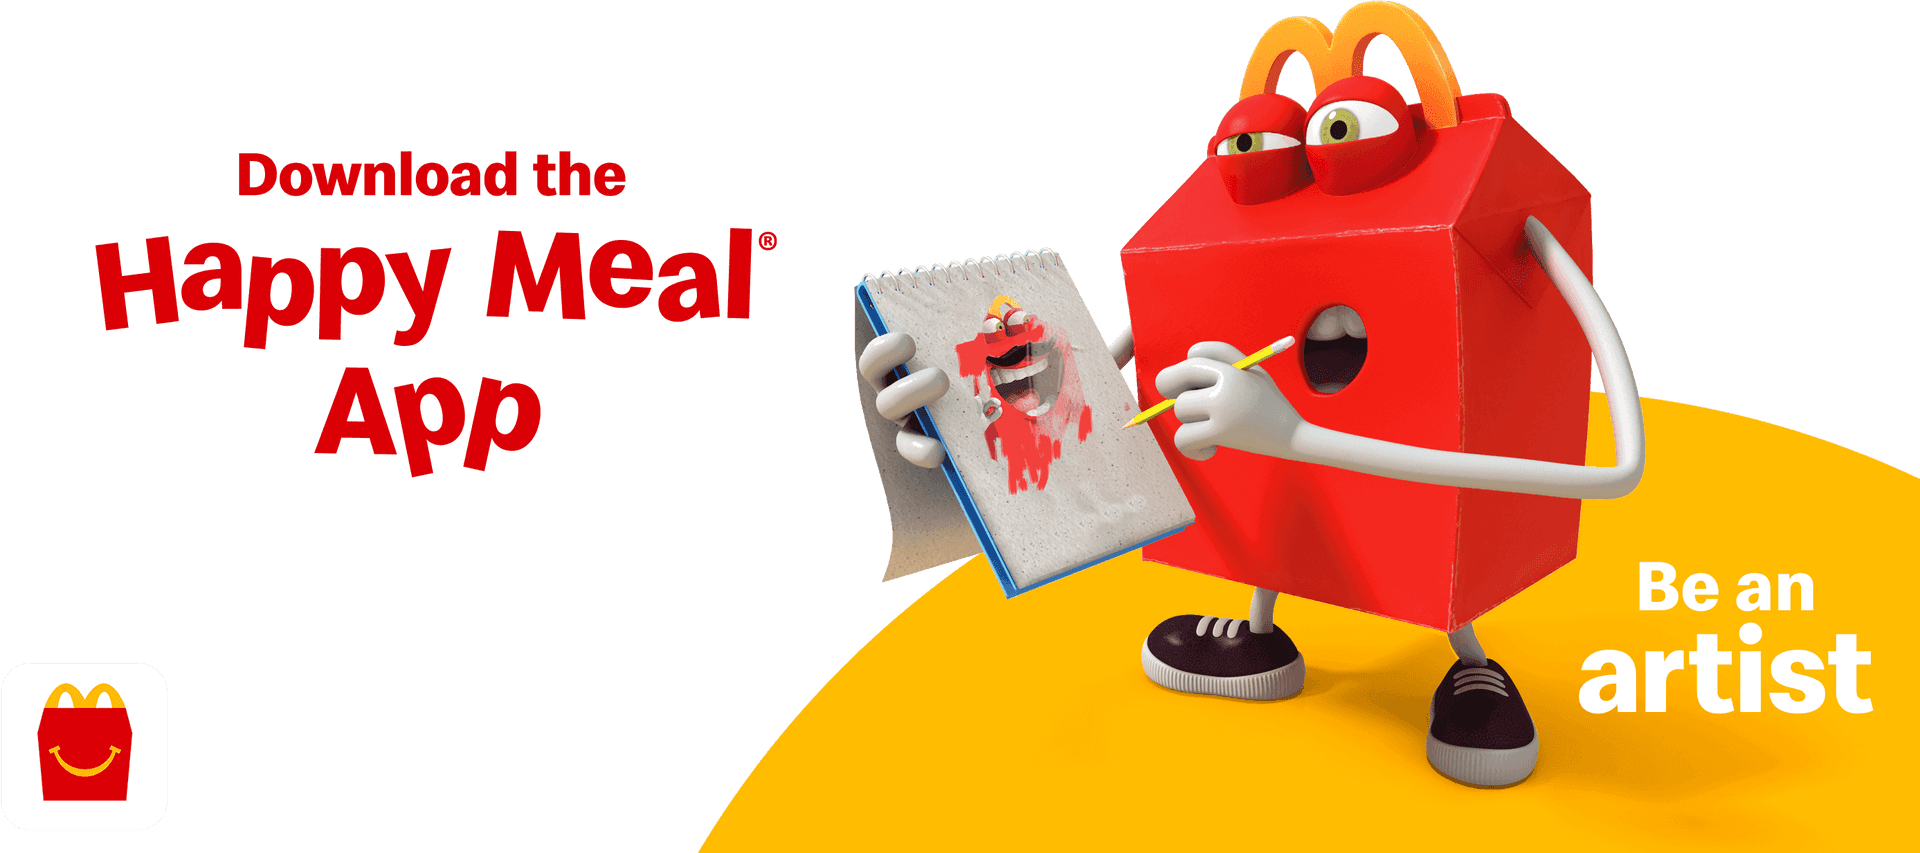 Happy Meal App Promotion Artist Theme PNG